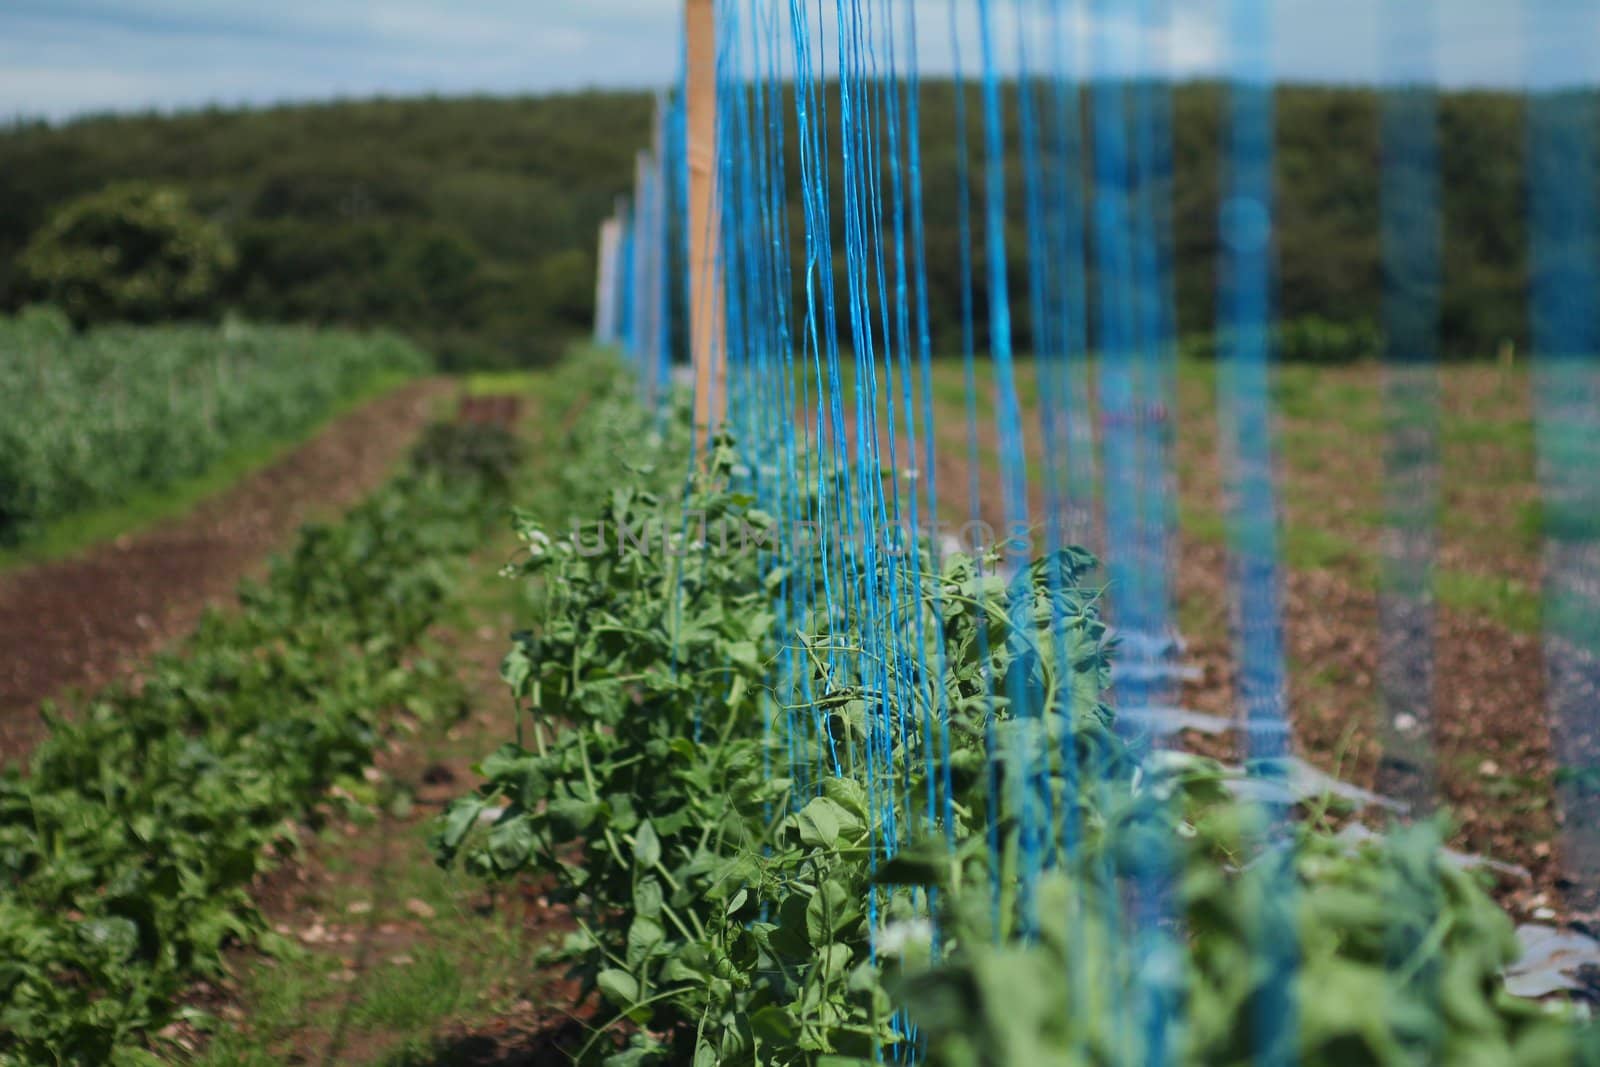 Field of organic peas, with blue strings in spring.